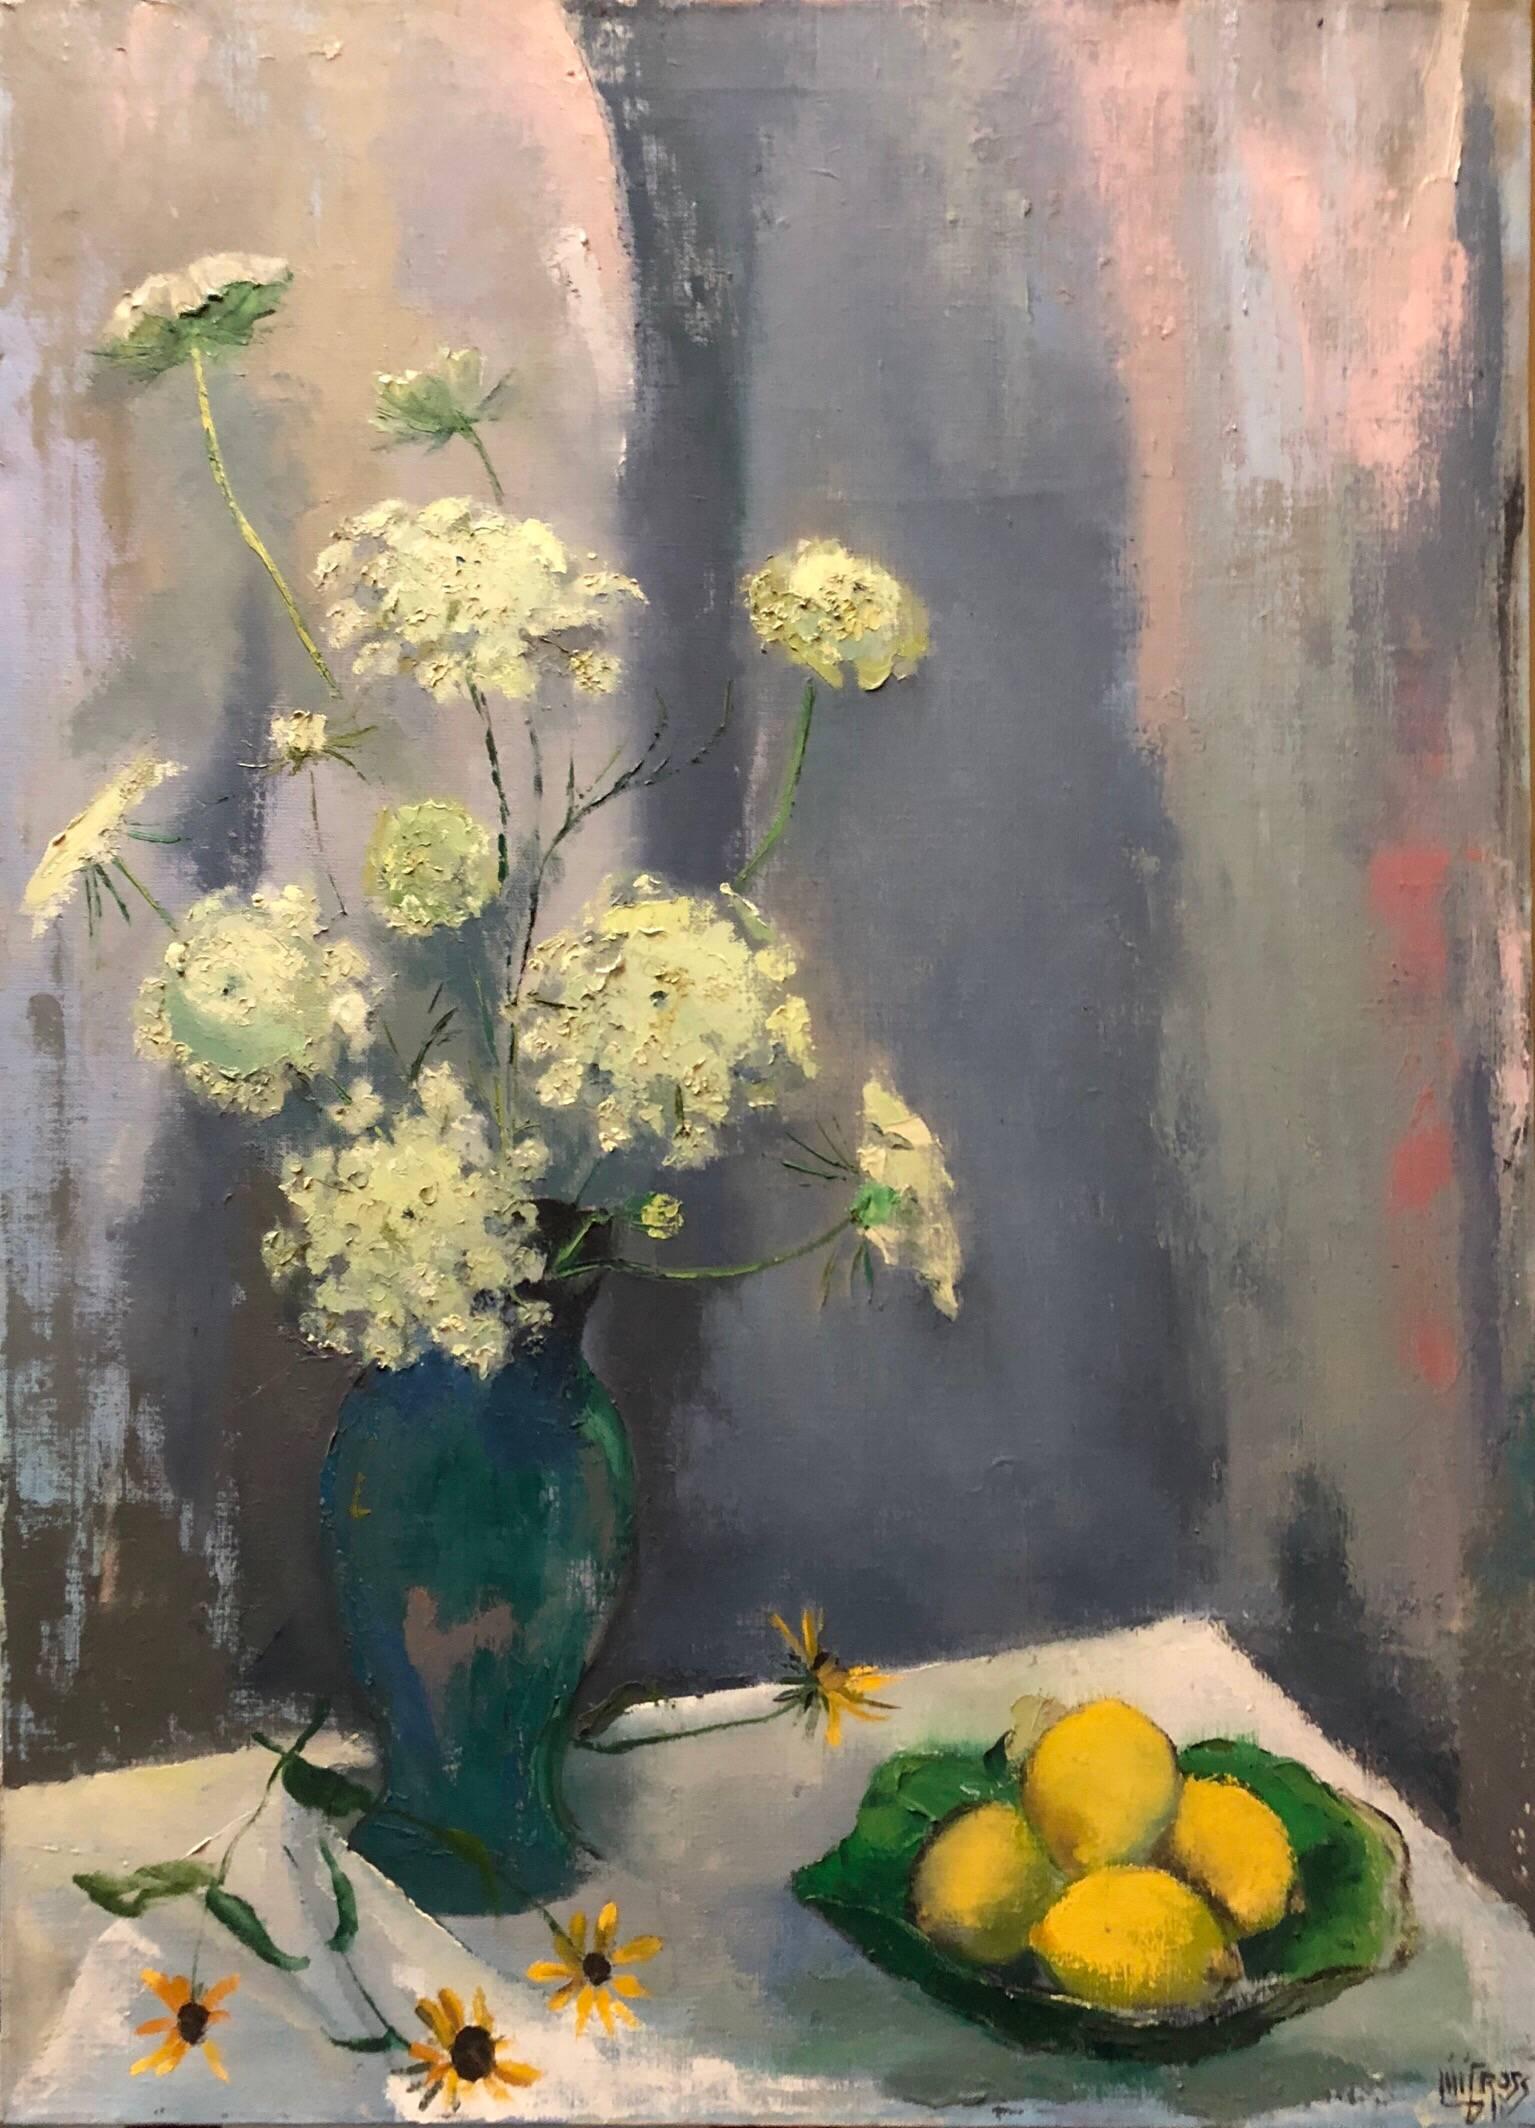 Lili Gross Figurative Painting - Still Life with Lemons and Flowers Modernist c1940s Oil Painting